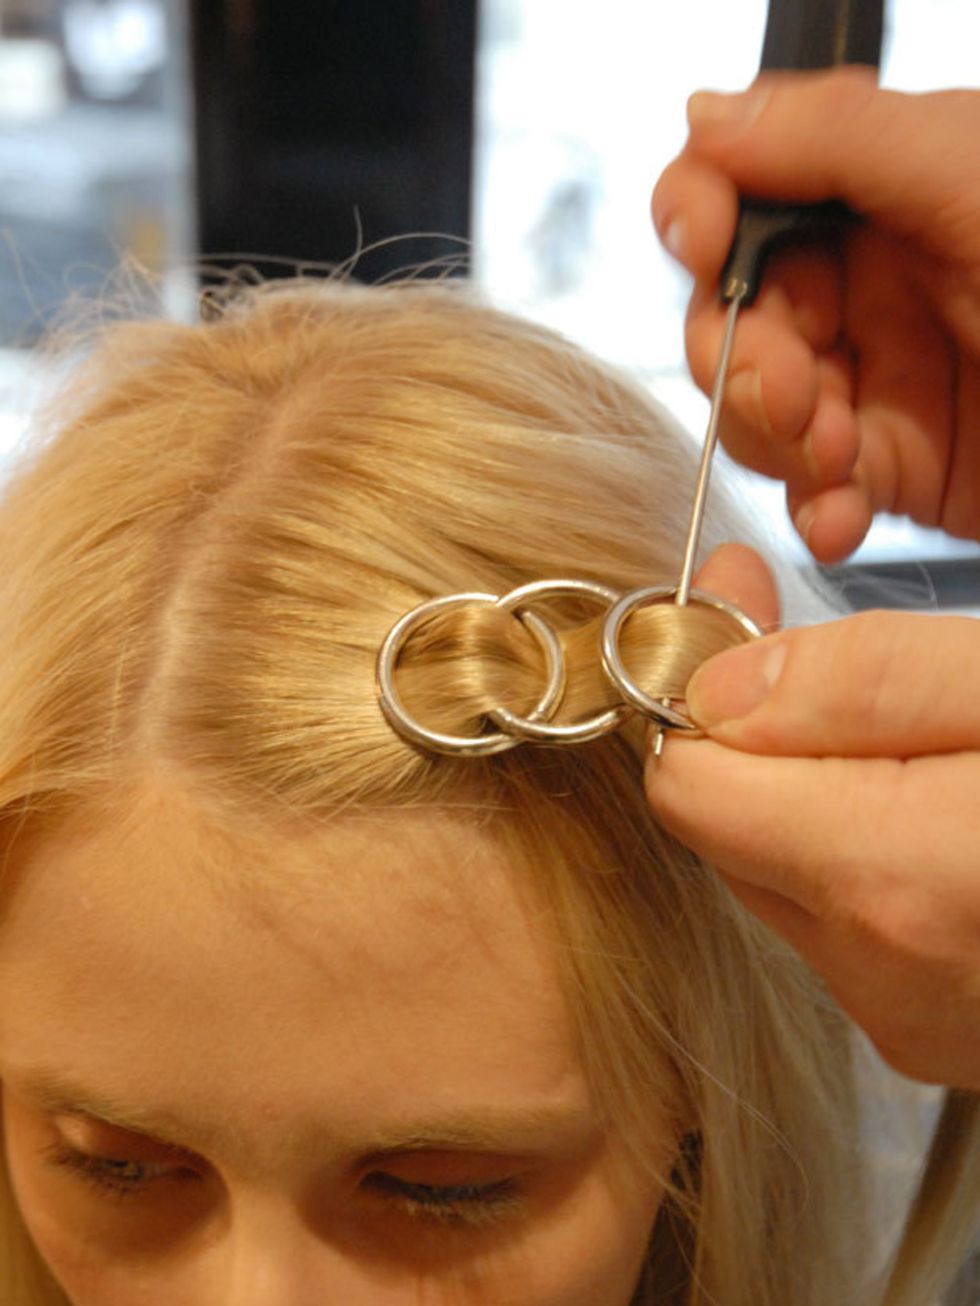 &lt;p&gt;&lt;strong&gt;Step ten:&lt;/strong&gt; Place your third hoop over the second and weave the hair through (see picture).&lt;/p&gt;